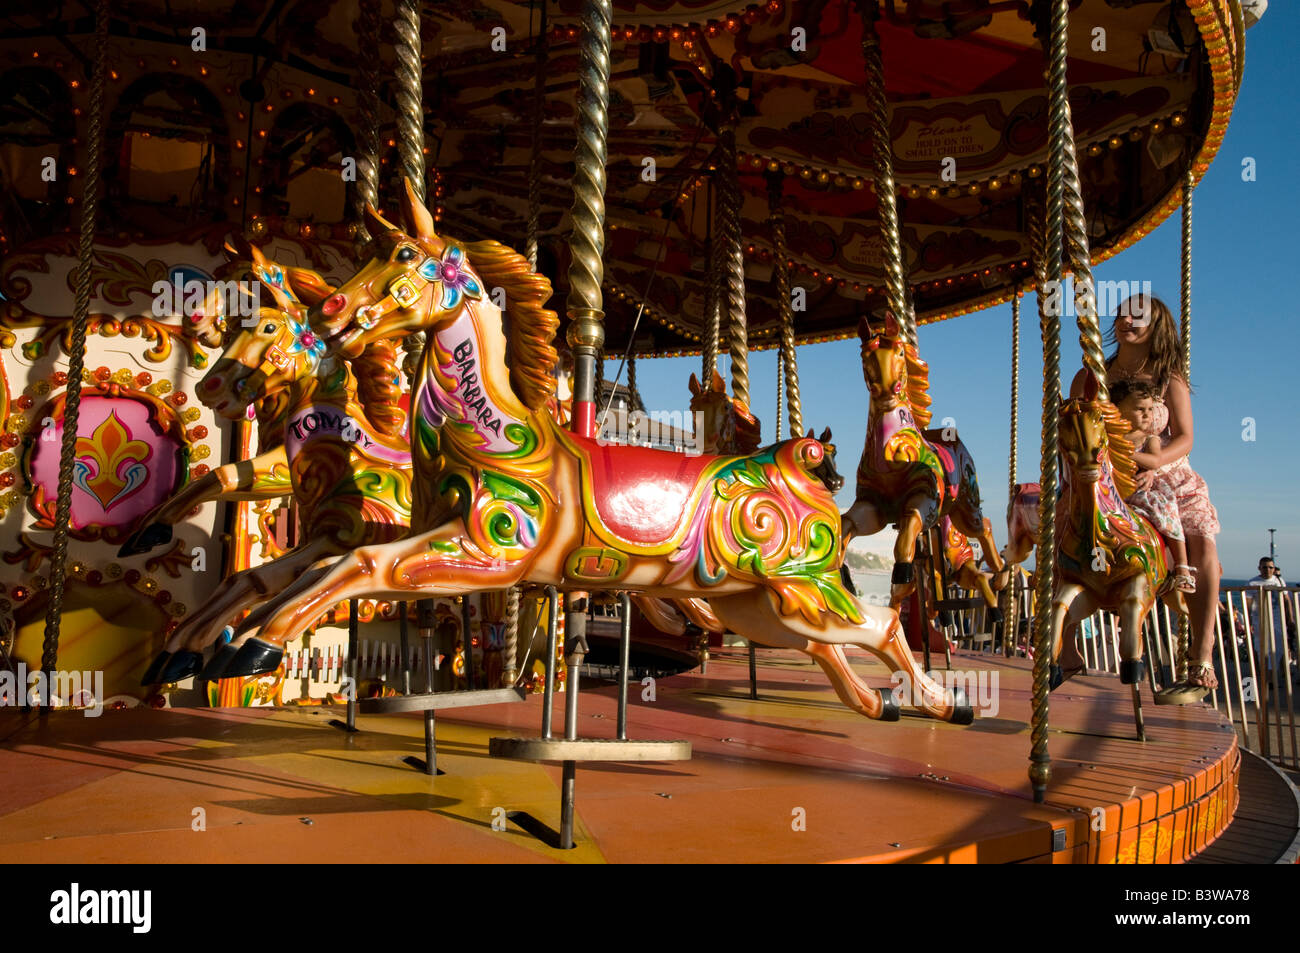 Fairground carousel Bournemouth, Angleterre, Royaume-Uni Banque D'Images